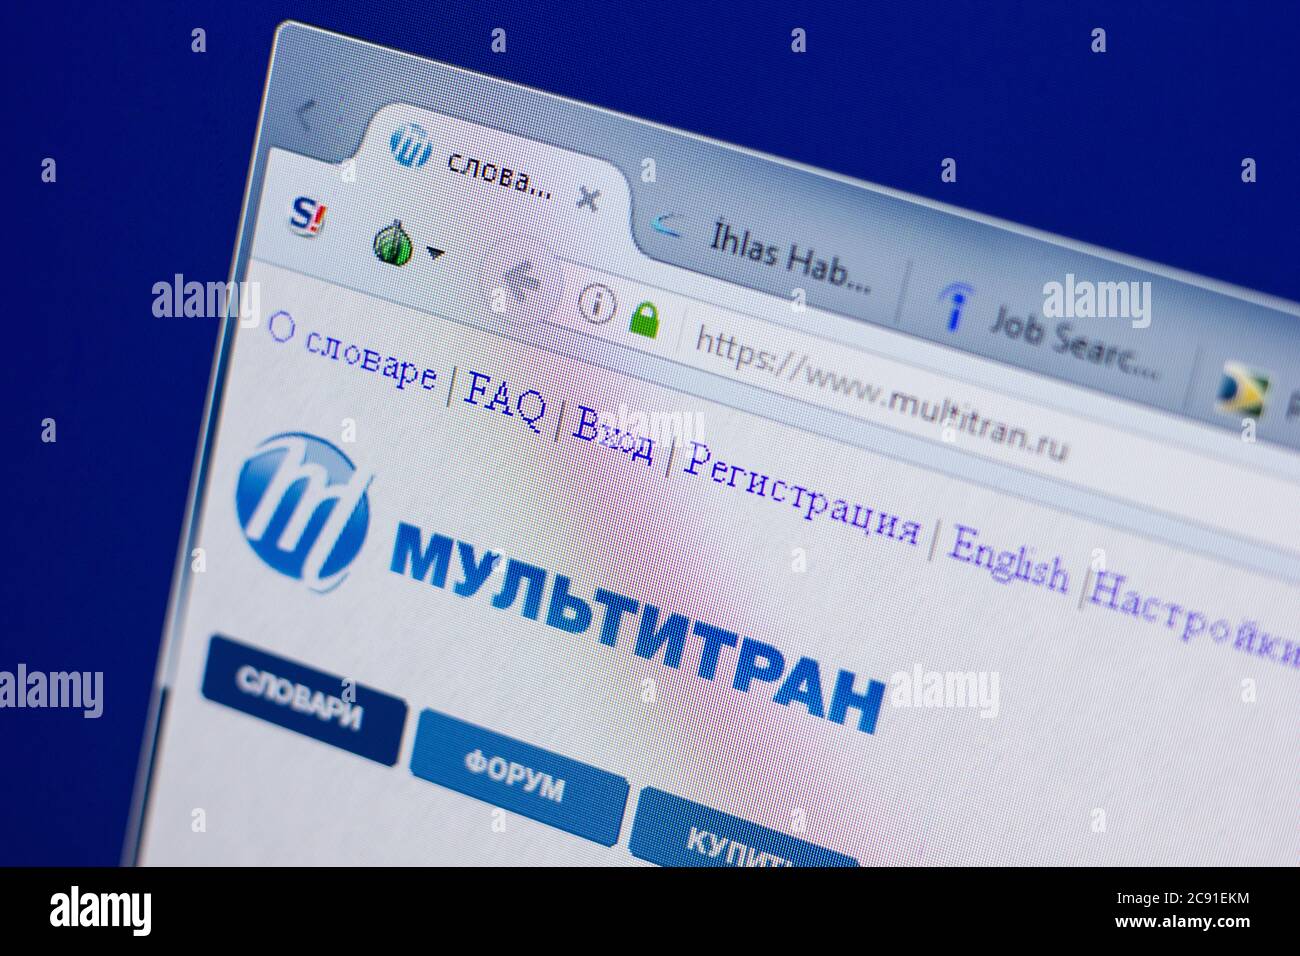 Ryazan, Russia - June 17, 2018: Homepage Of Linguee Website On The Display  Of PC, Url - Linguee.fr Stock Photo, Picture and Royalty Free Image. Image  110804422.